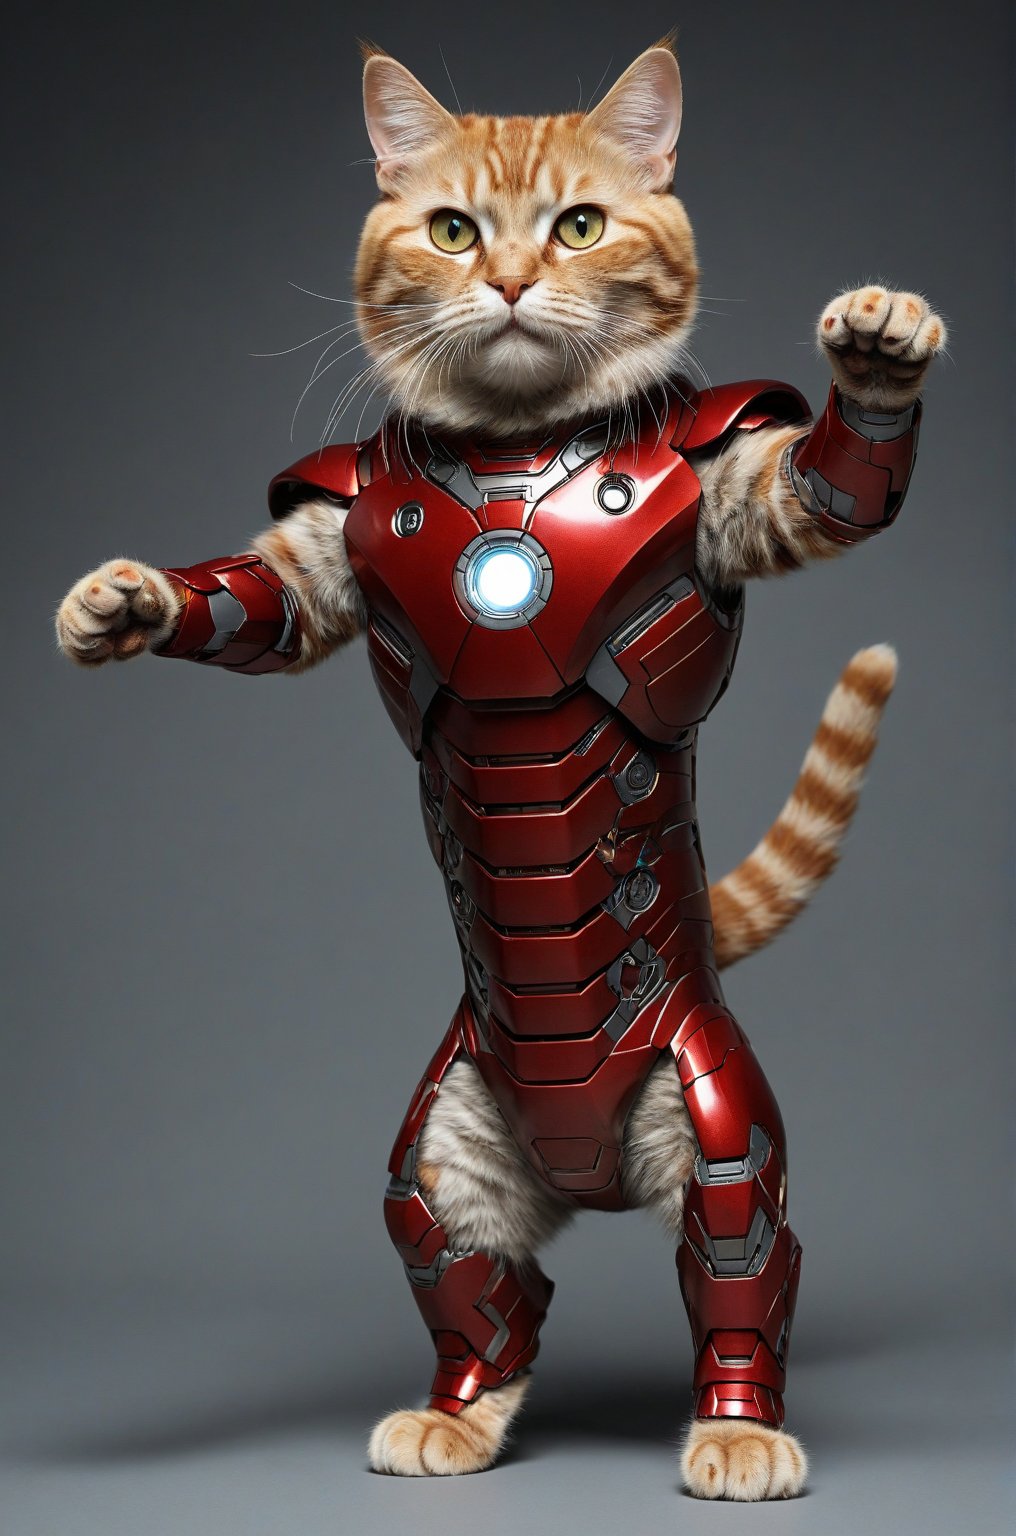 Extremely realistic, high-definition, real cat, A cat dressed as Iron Man, standing like a human, with arms outstretched